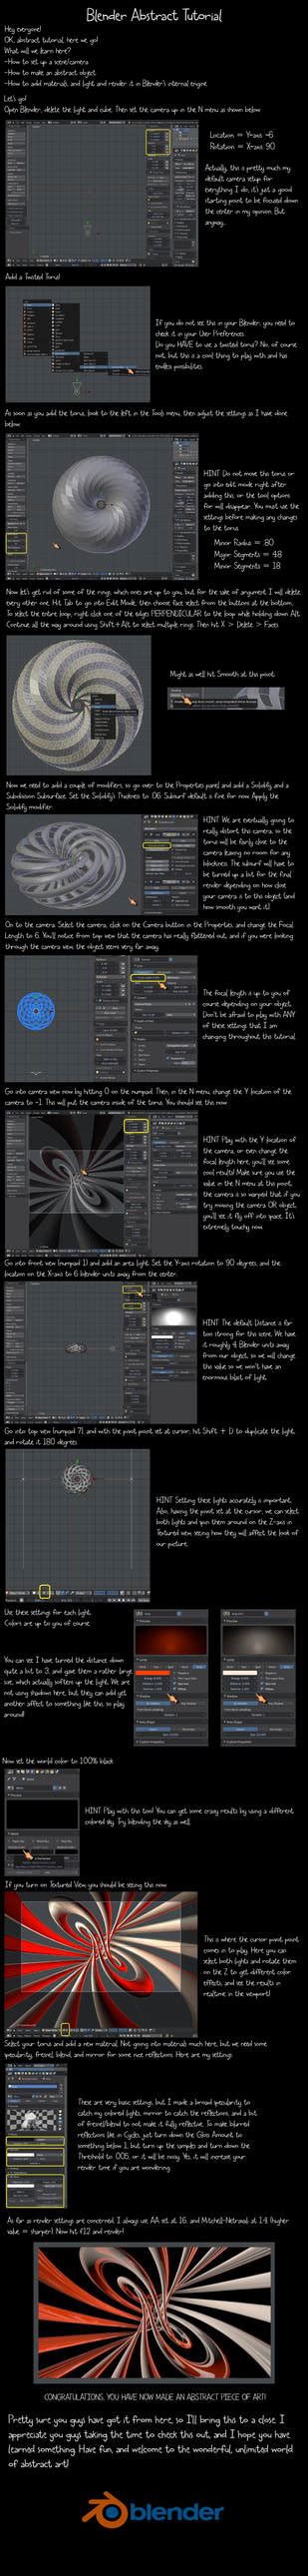 Blender Abstract Tutorial By Vickym72 On Deviantart